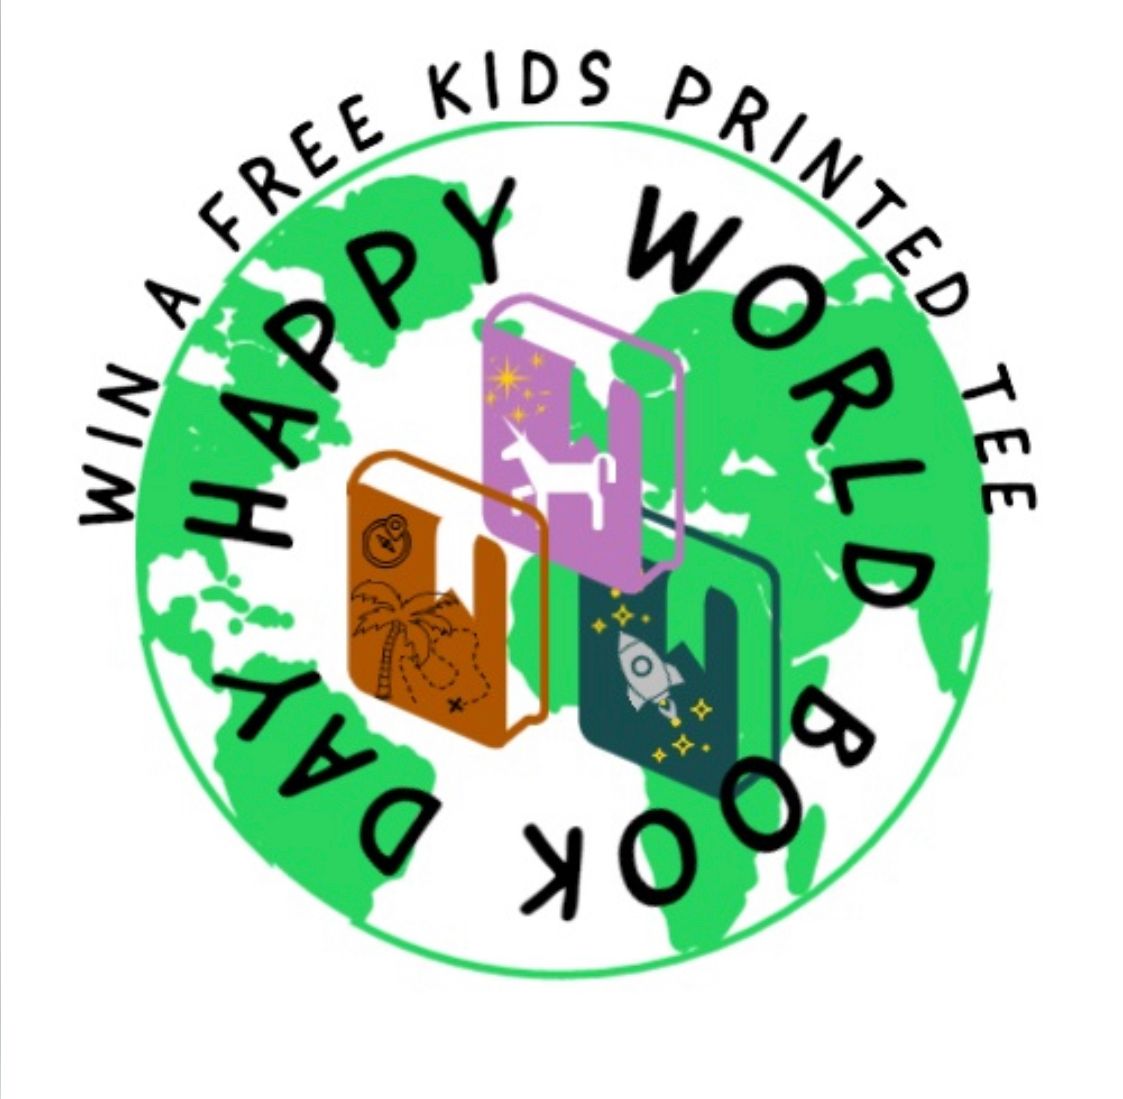 Win a Kid's Tshirt competition Entry (FREE)